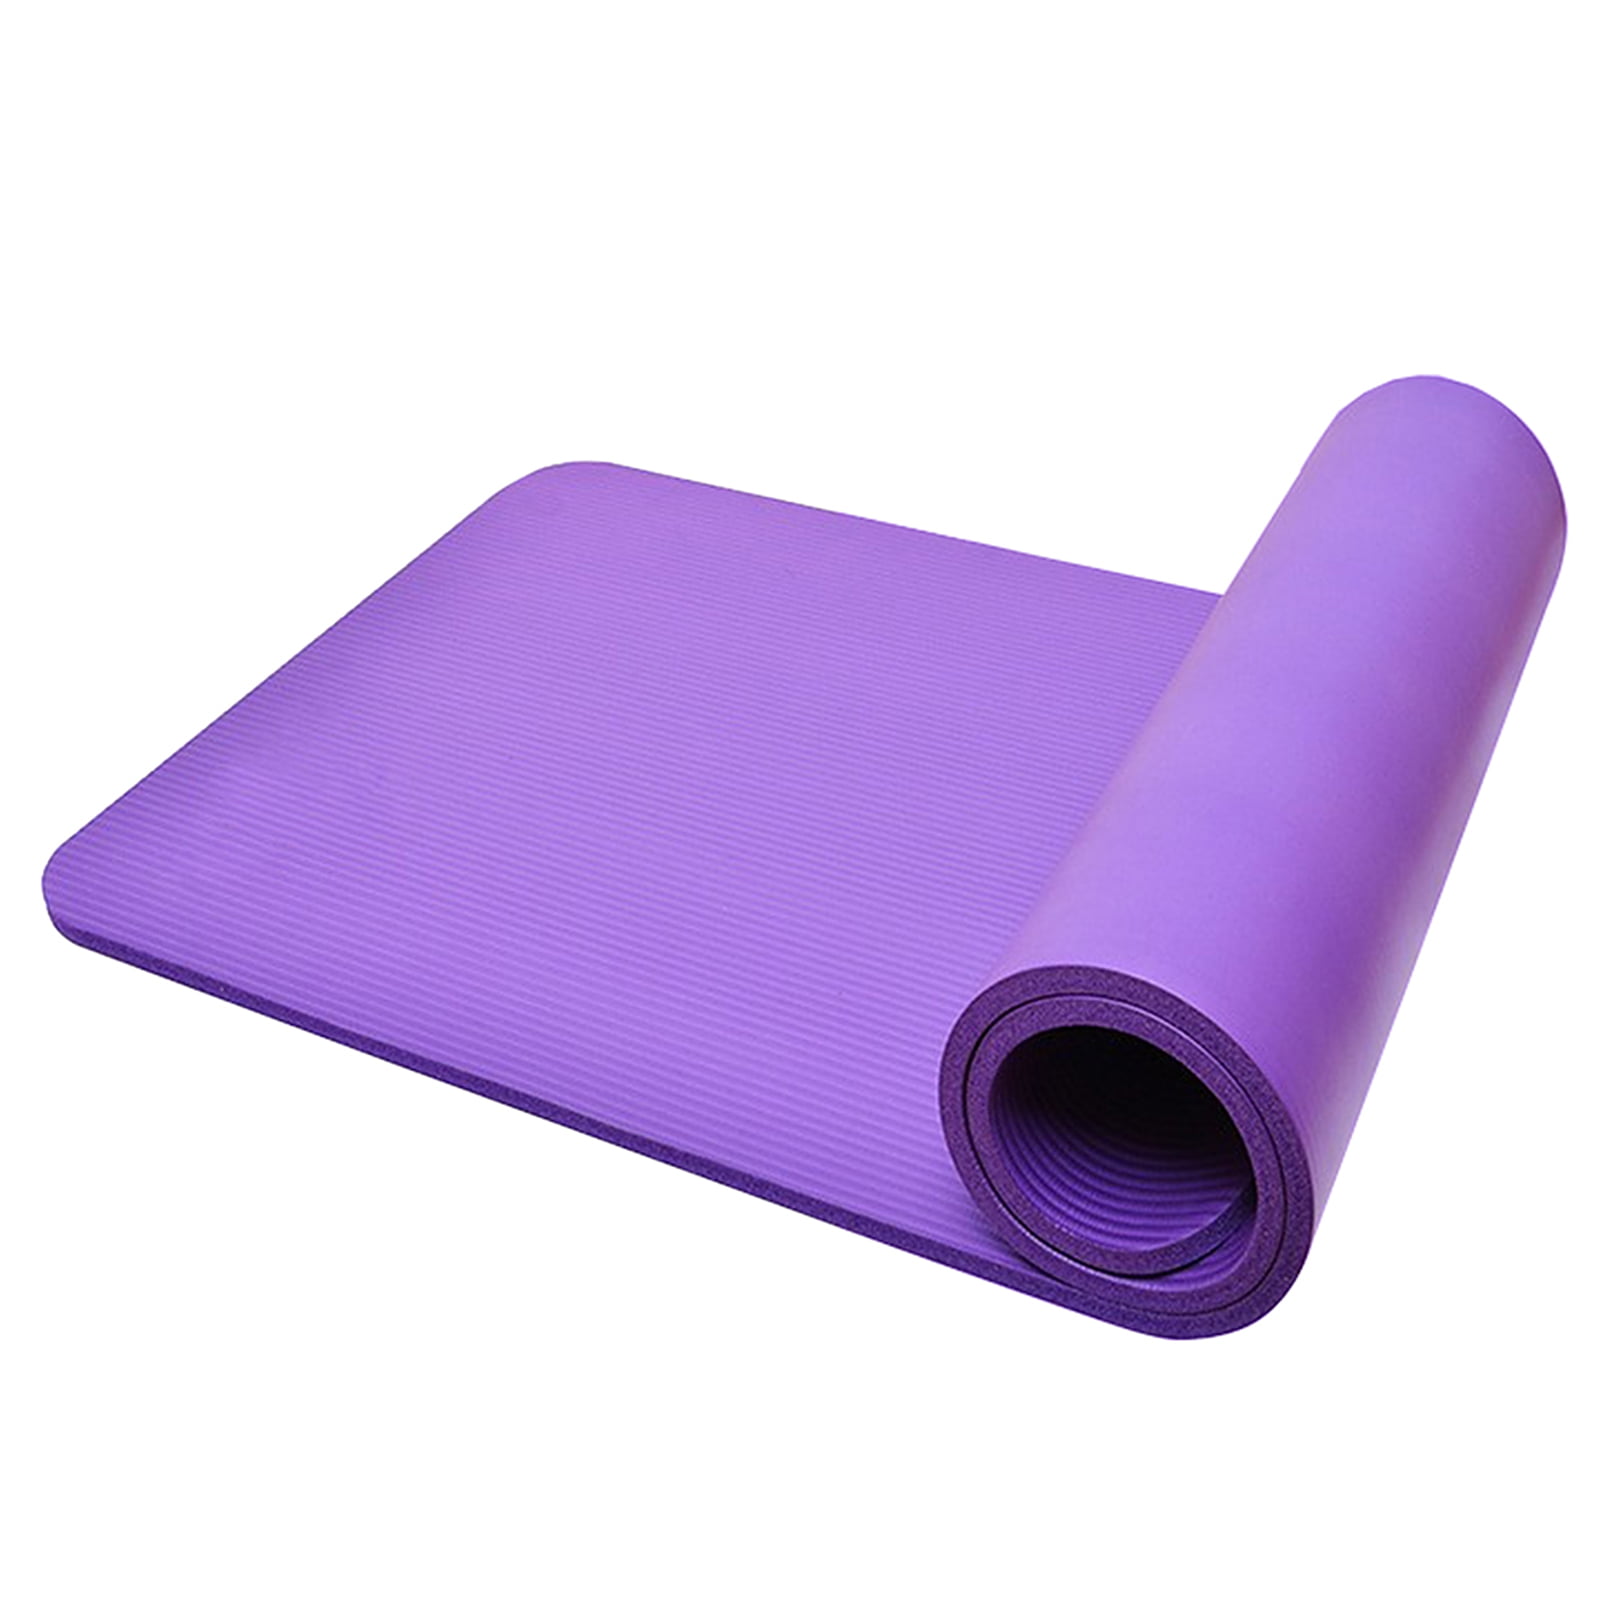 Yoga Mat 10mm Non Slip Fitness Pilates Exercise Pad Eco Friendly Work Out Mats 